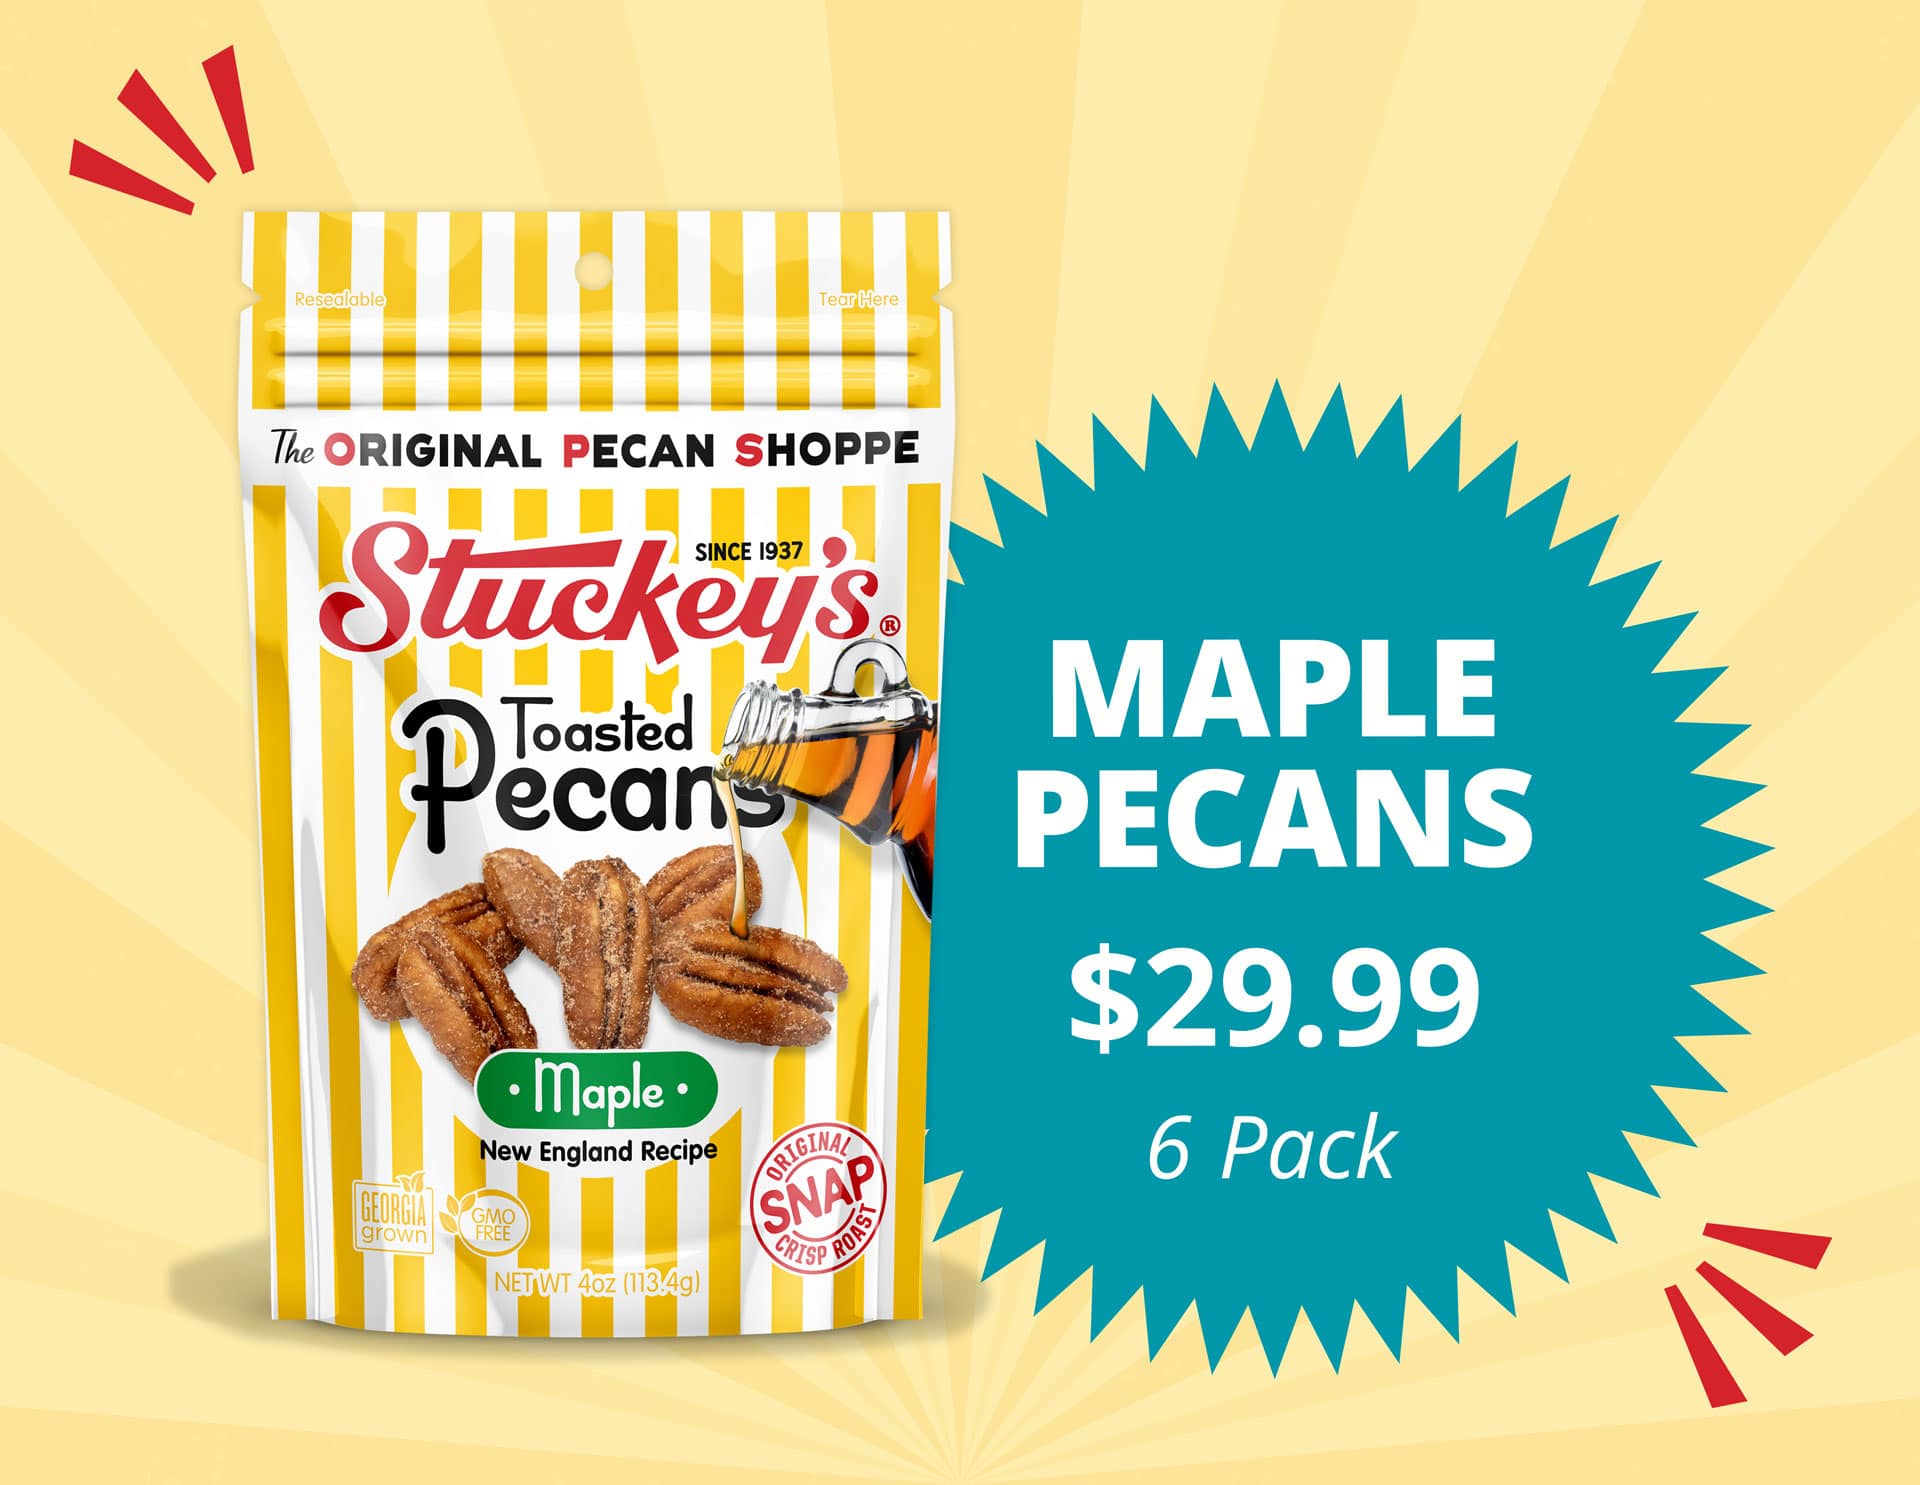 Maple Pecans - $29.99 for 6 Pack